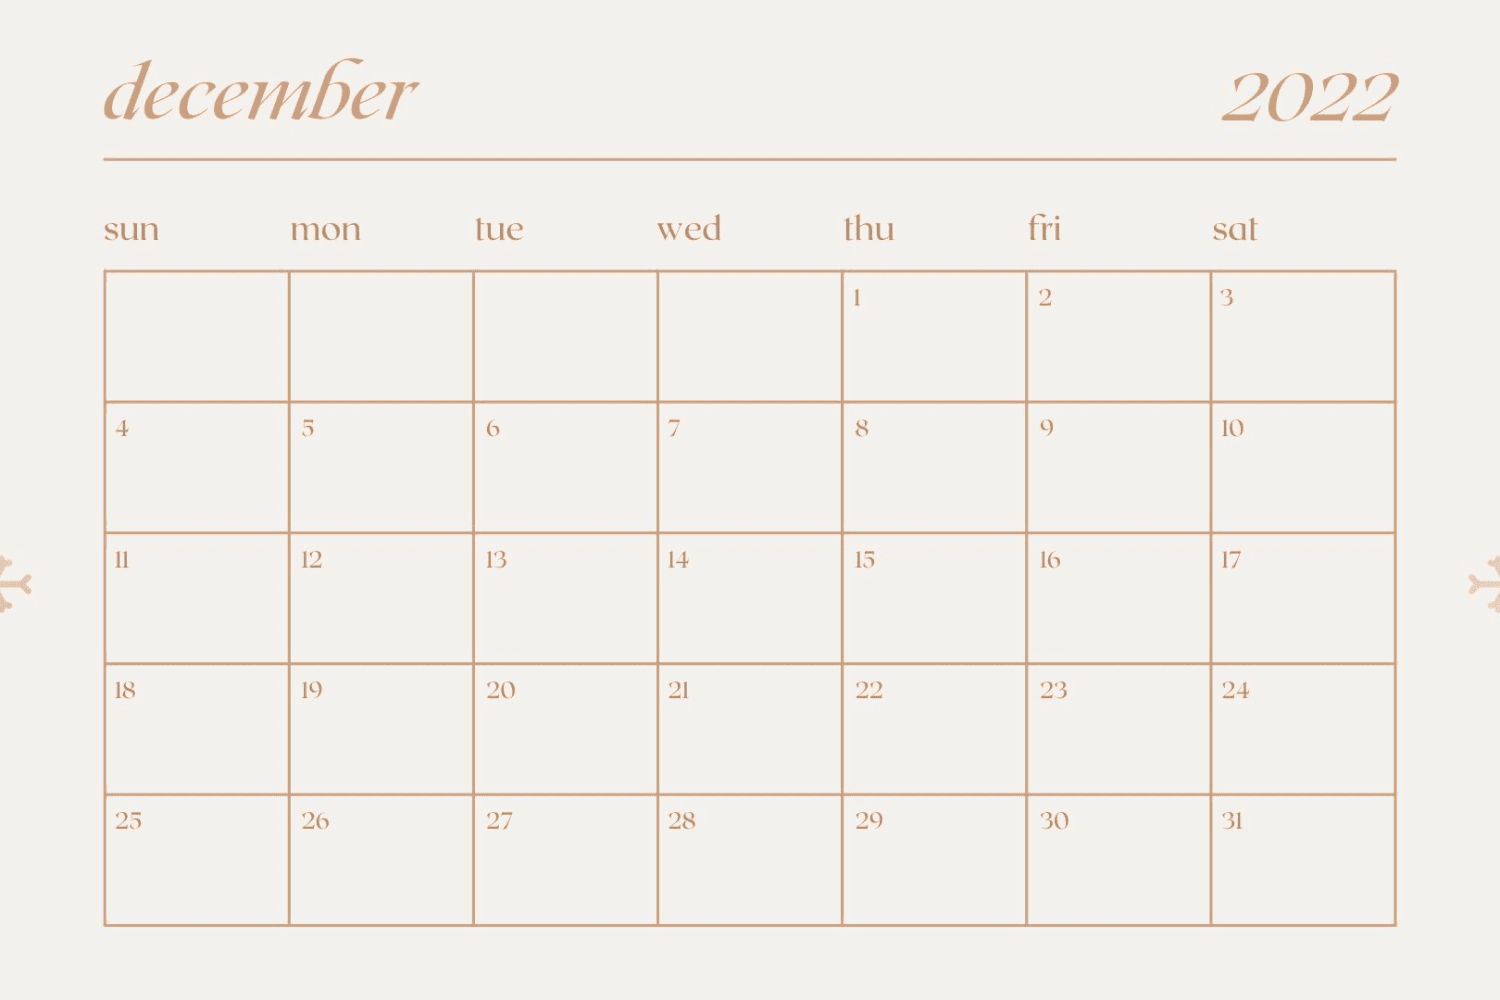 December calendar with pink background and gold text and lines.